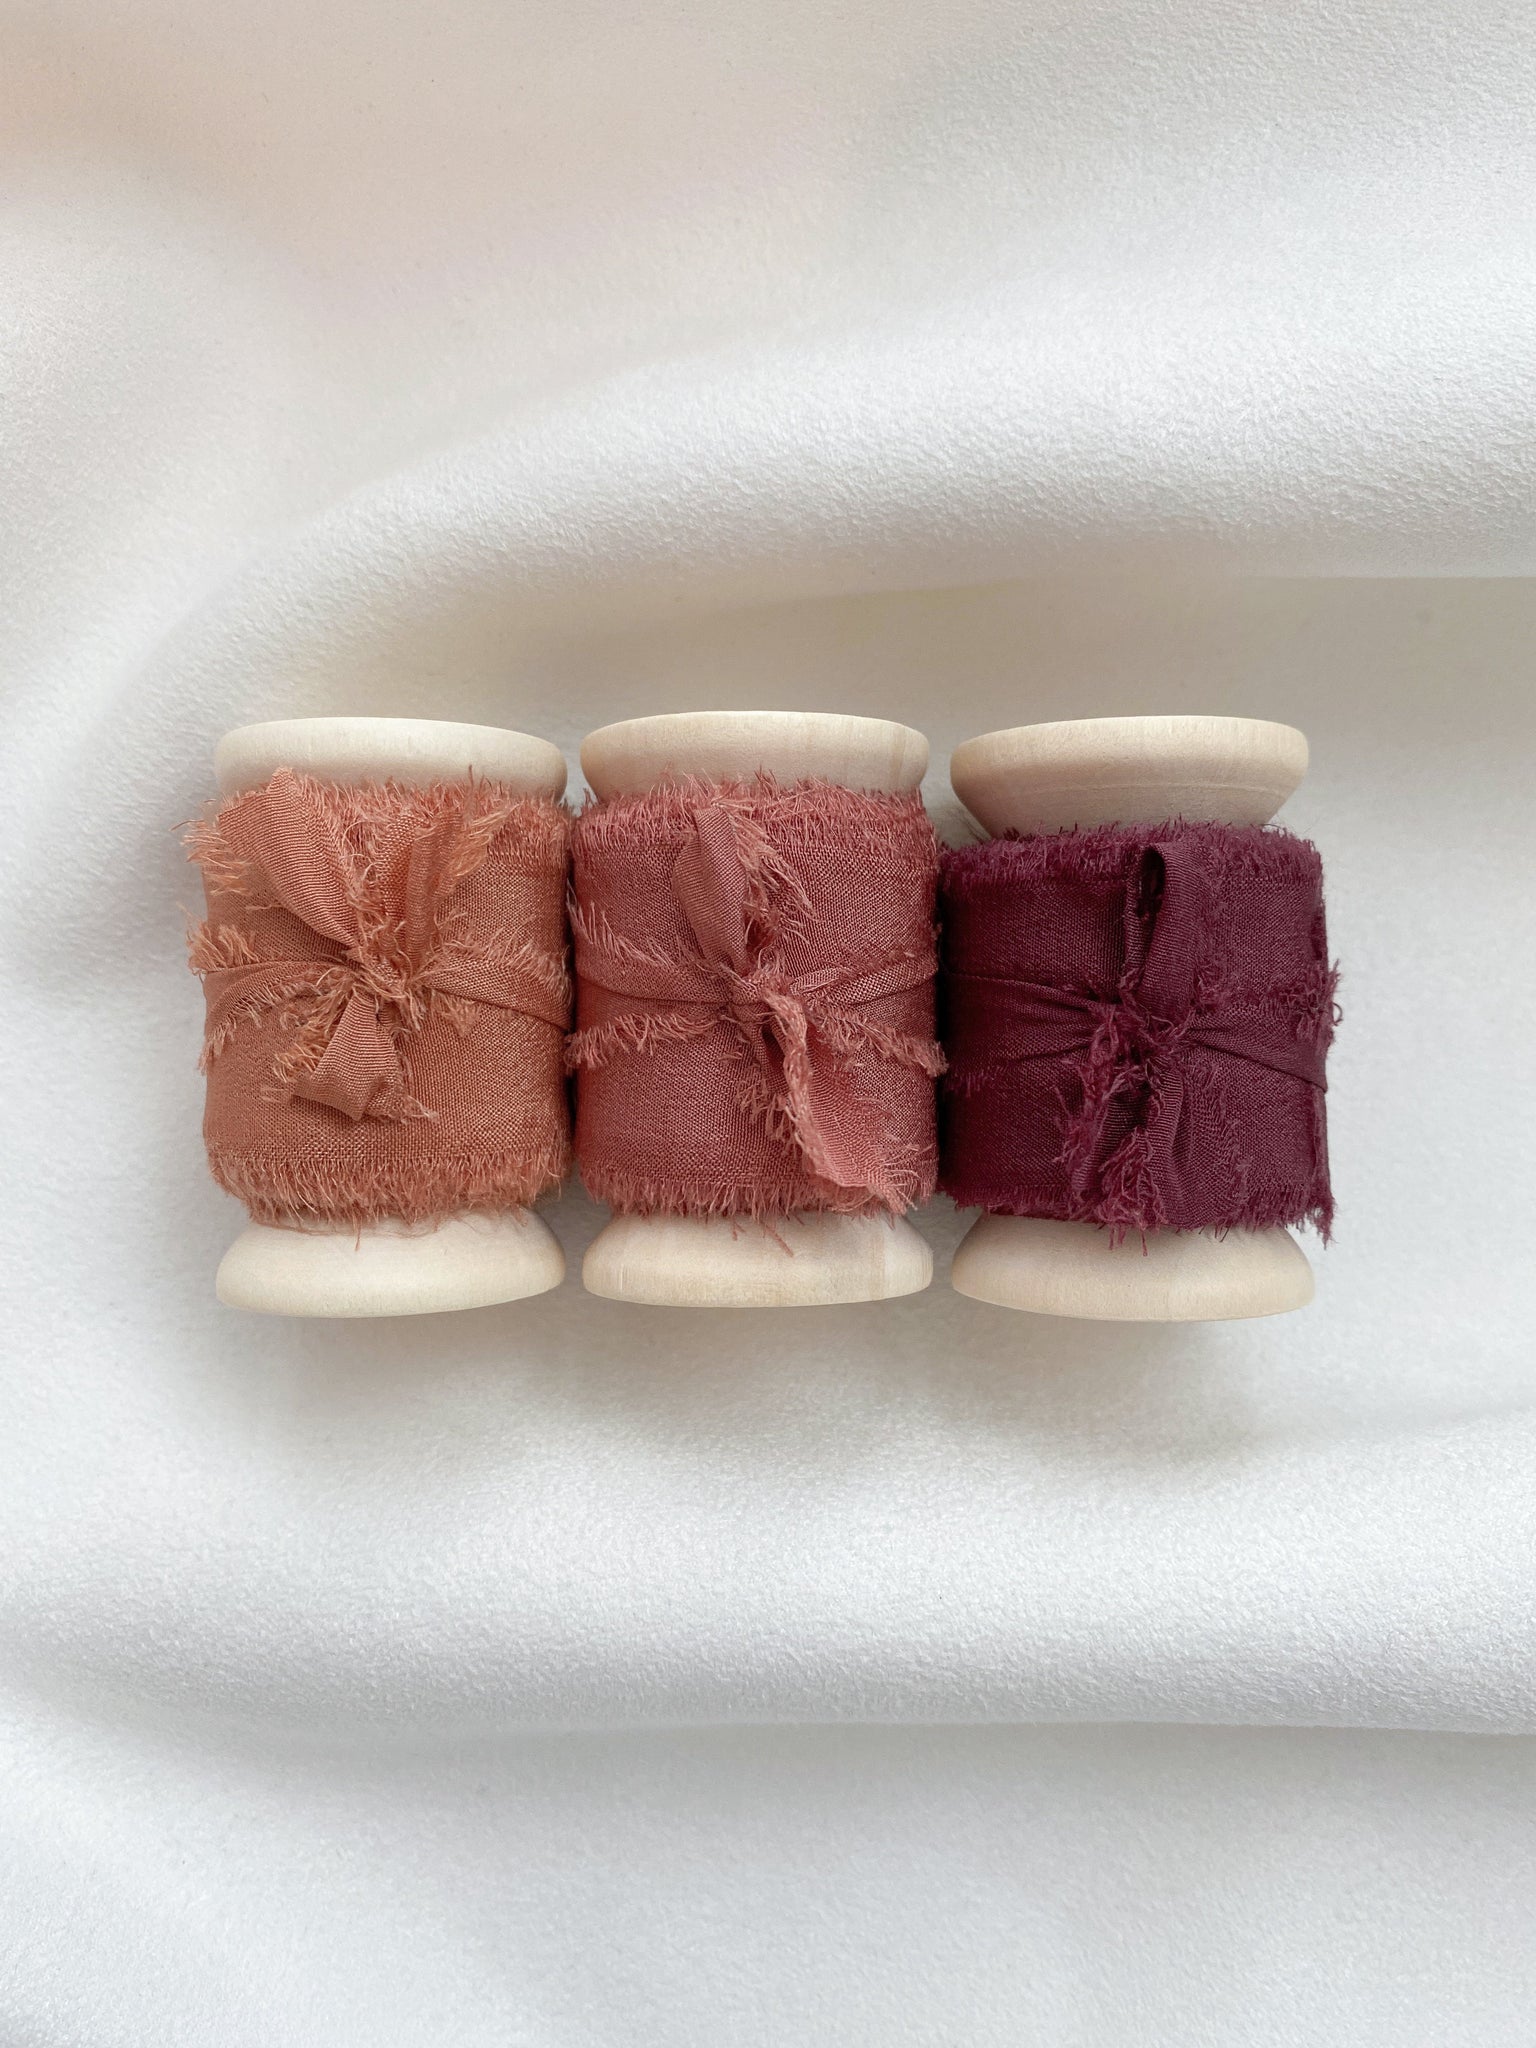 Raw edge 1 inch silk ribbon set of 3 in color Clay, Terracotta, and Wine